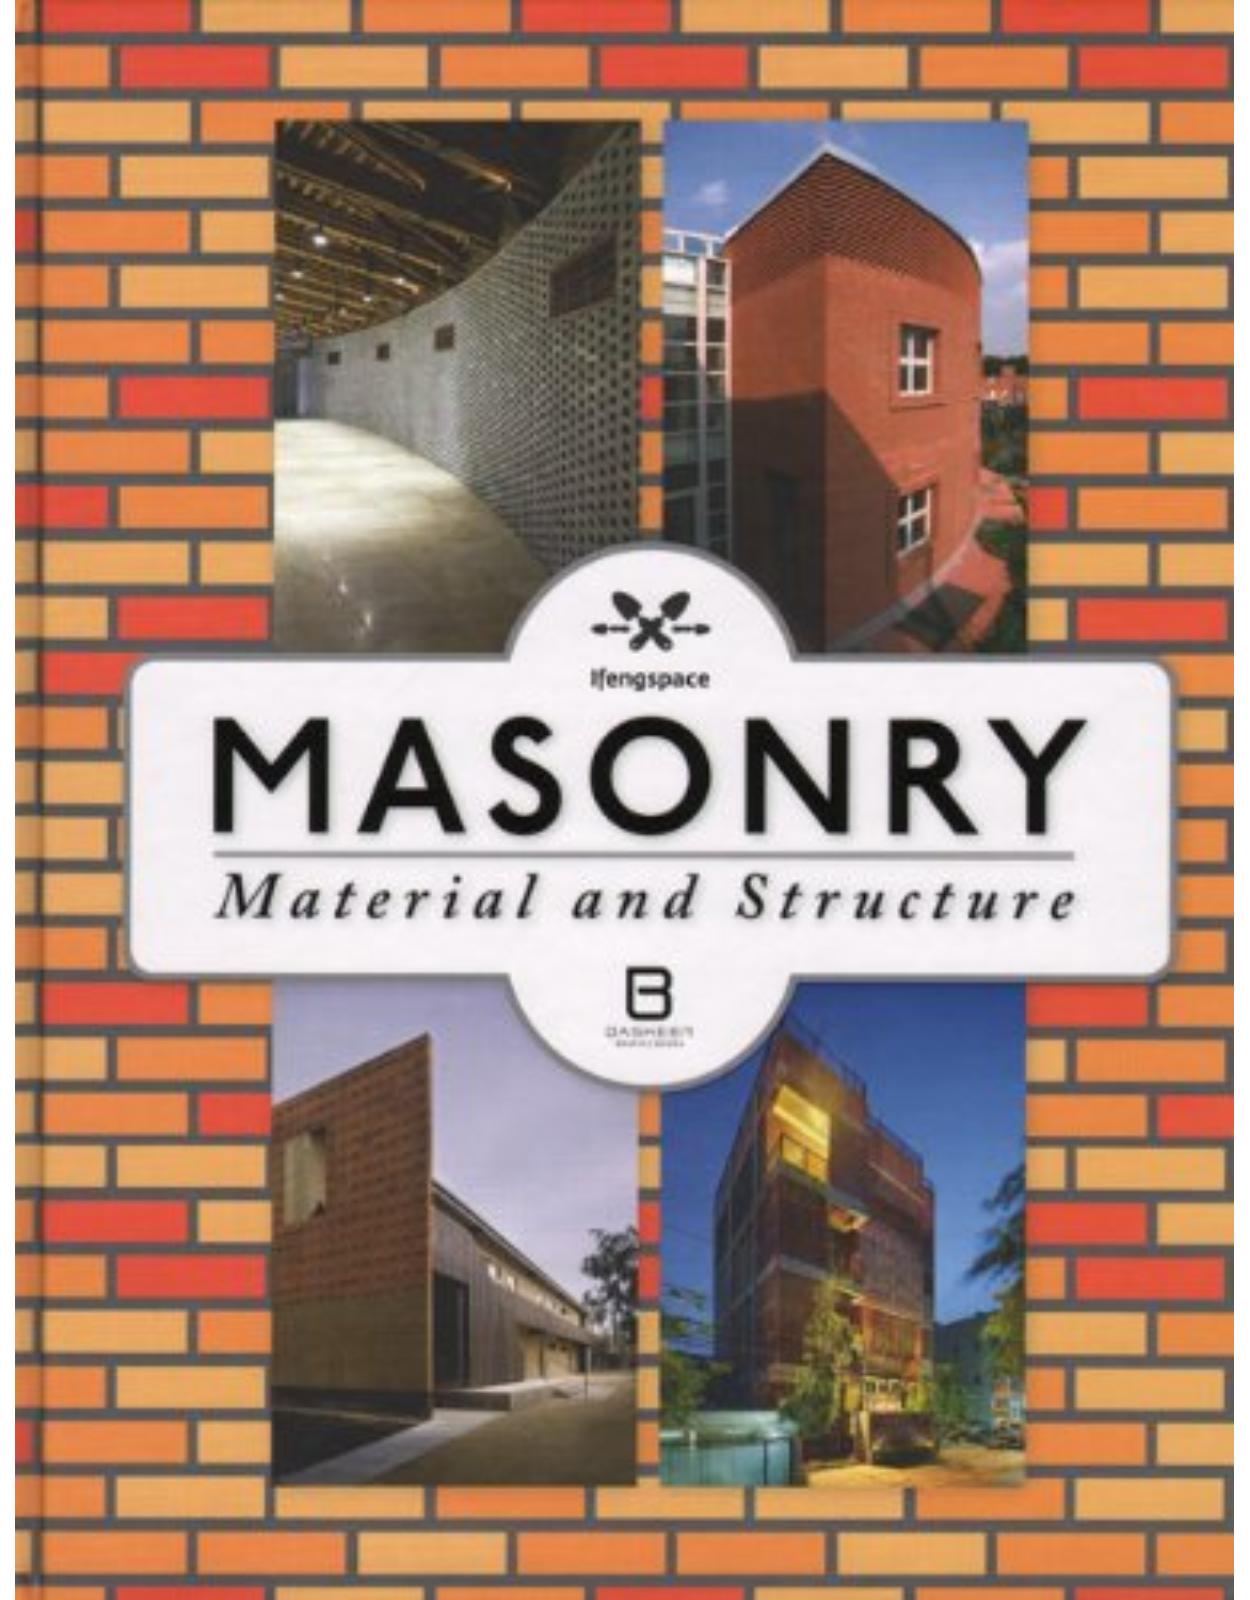 Masonry - Material and Structure